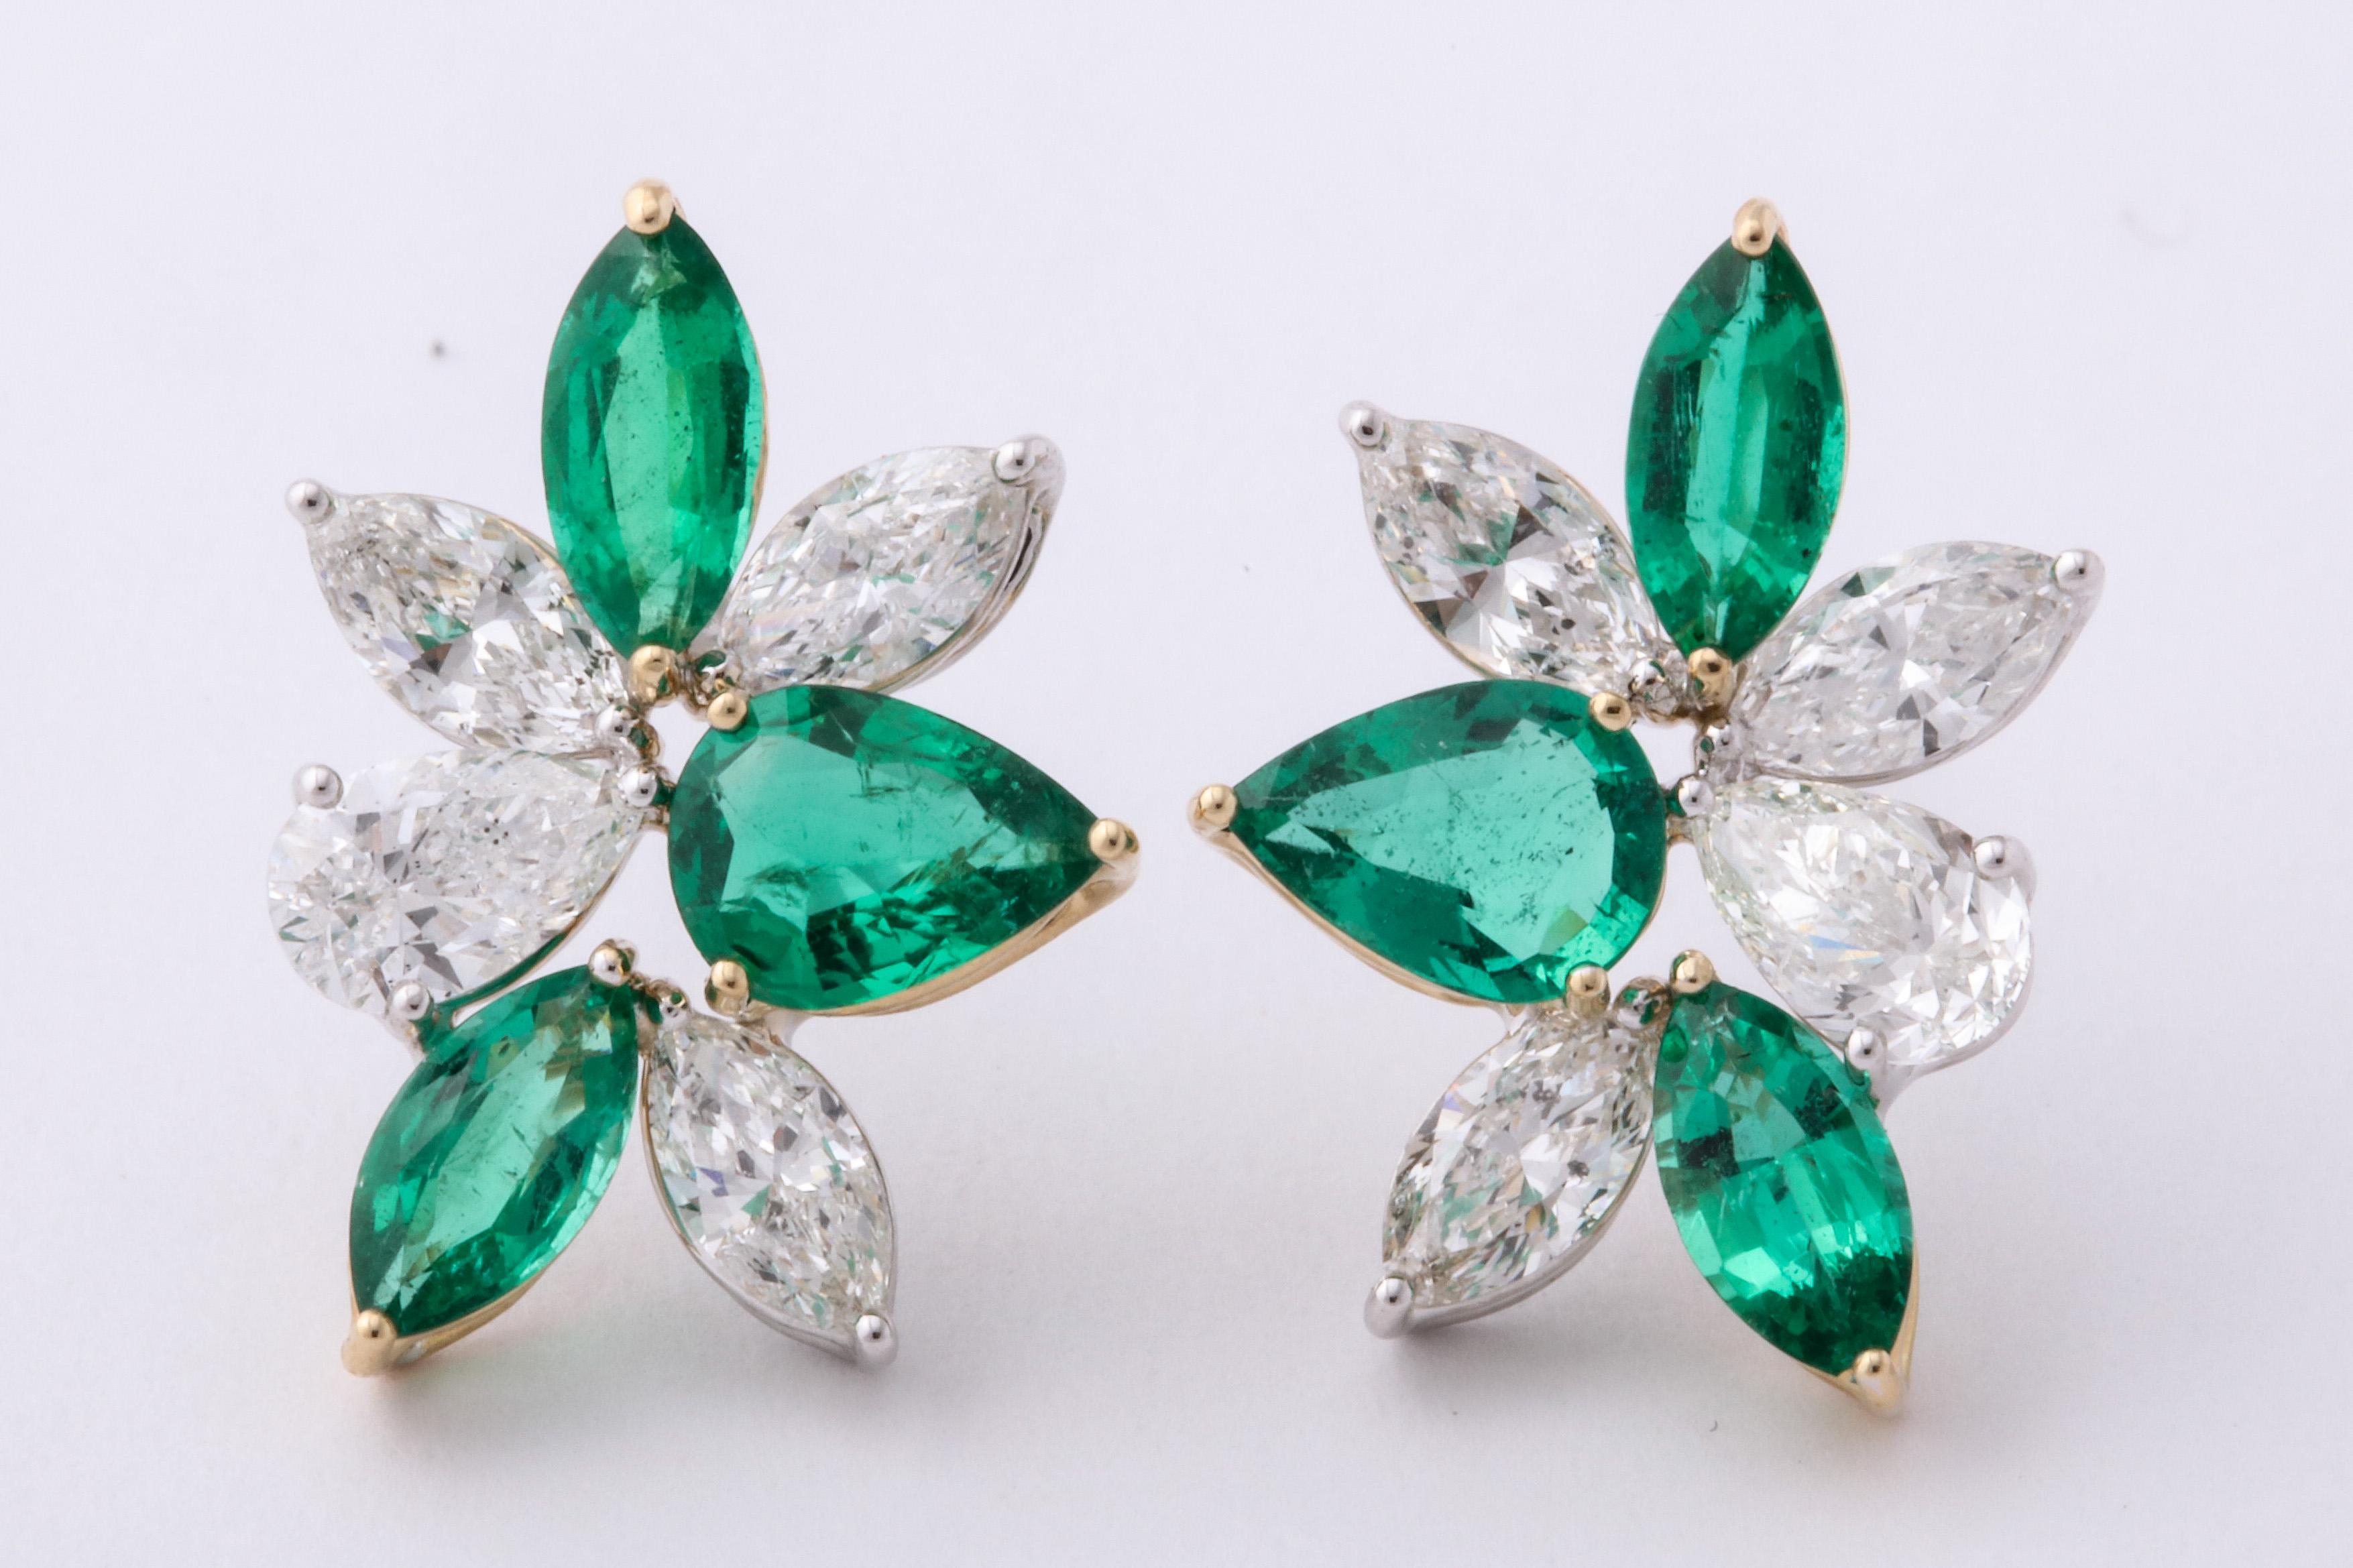 
A unique pair of cluster earrings with a POP of color!

2.18 carats of white pear shape and marquise cut diamonds

2.01 carats of fine green pear and marquise cut emeralds 

18k white and yellow gold 

A 3/4 of an inch long and a little over half